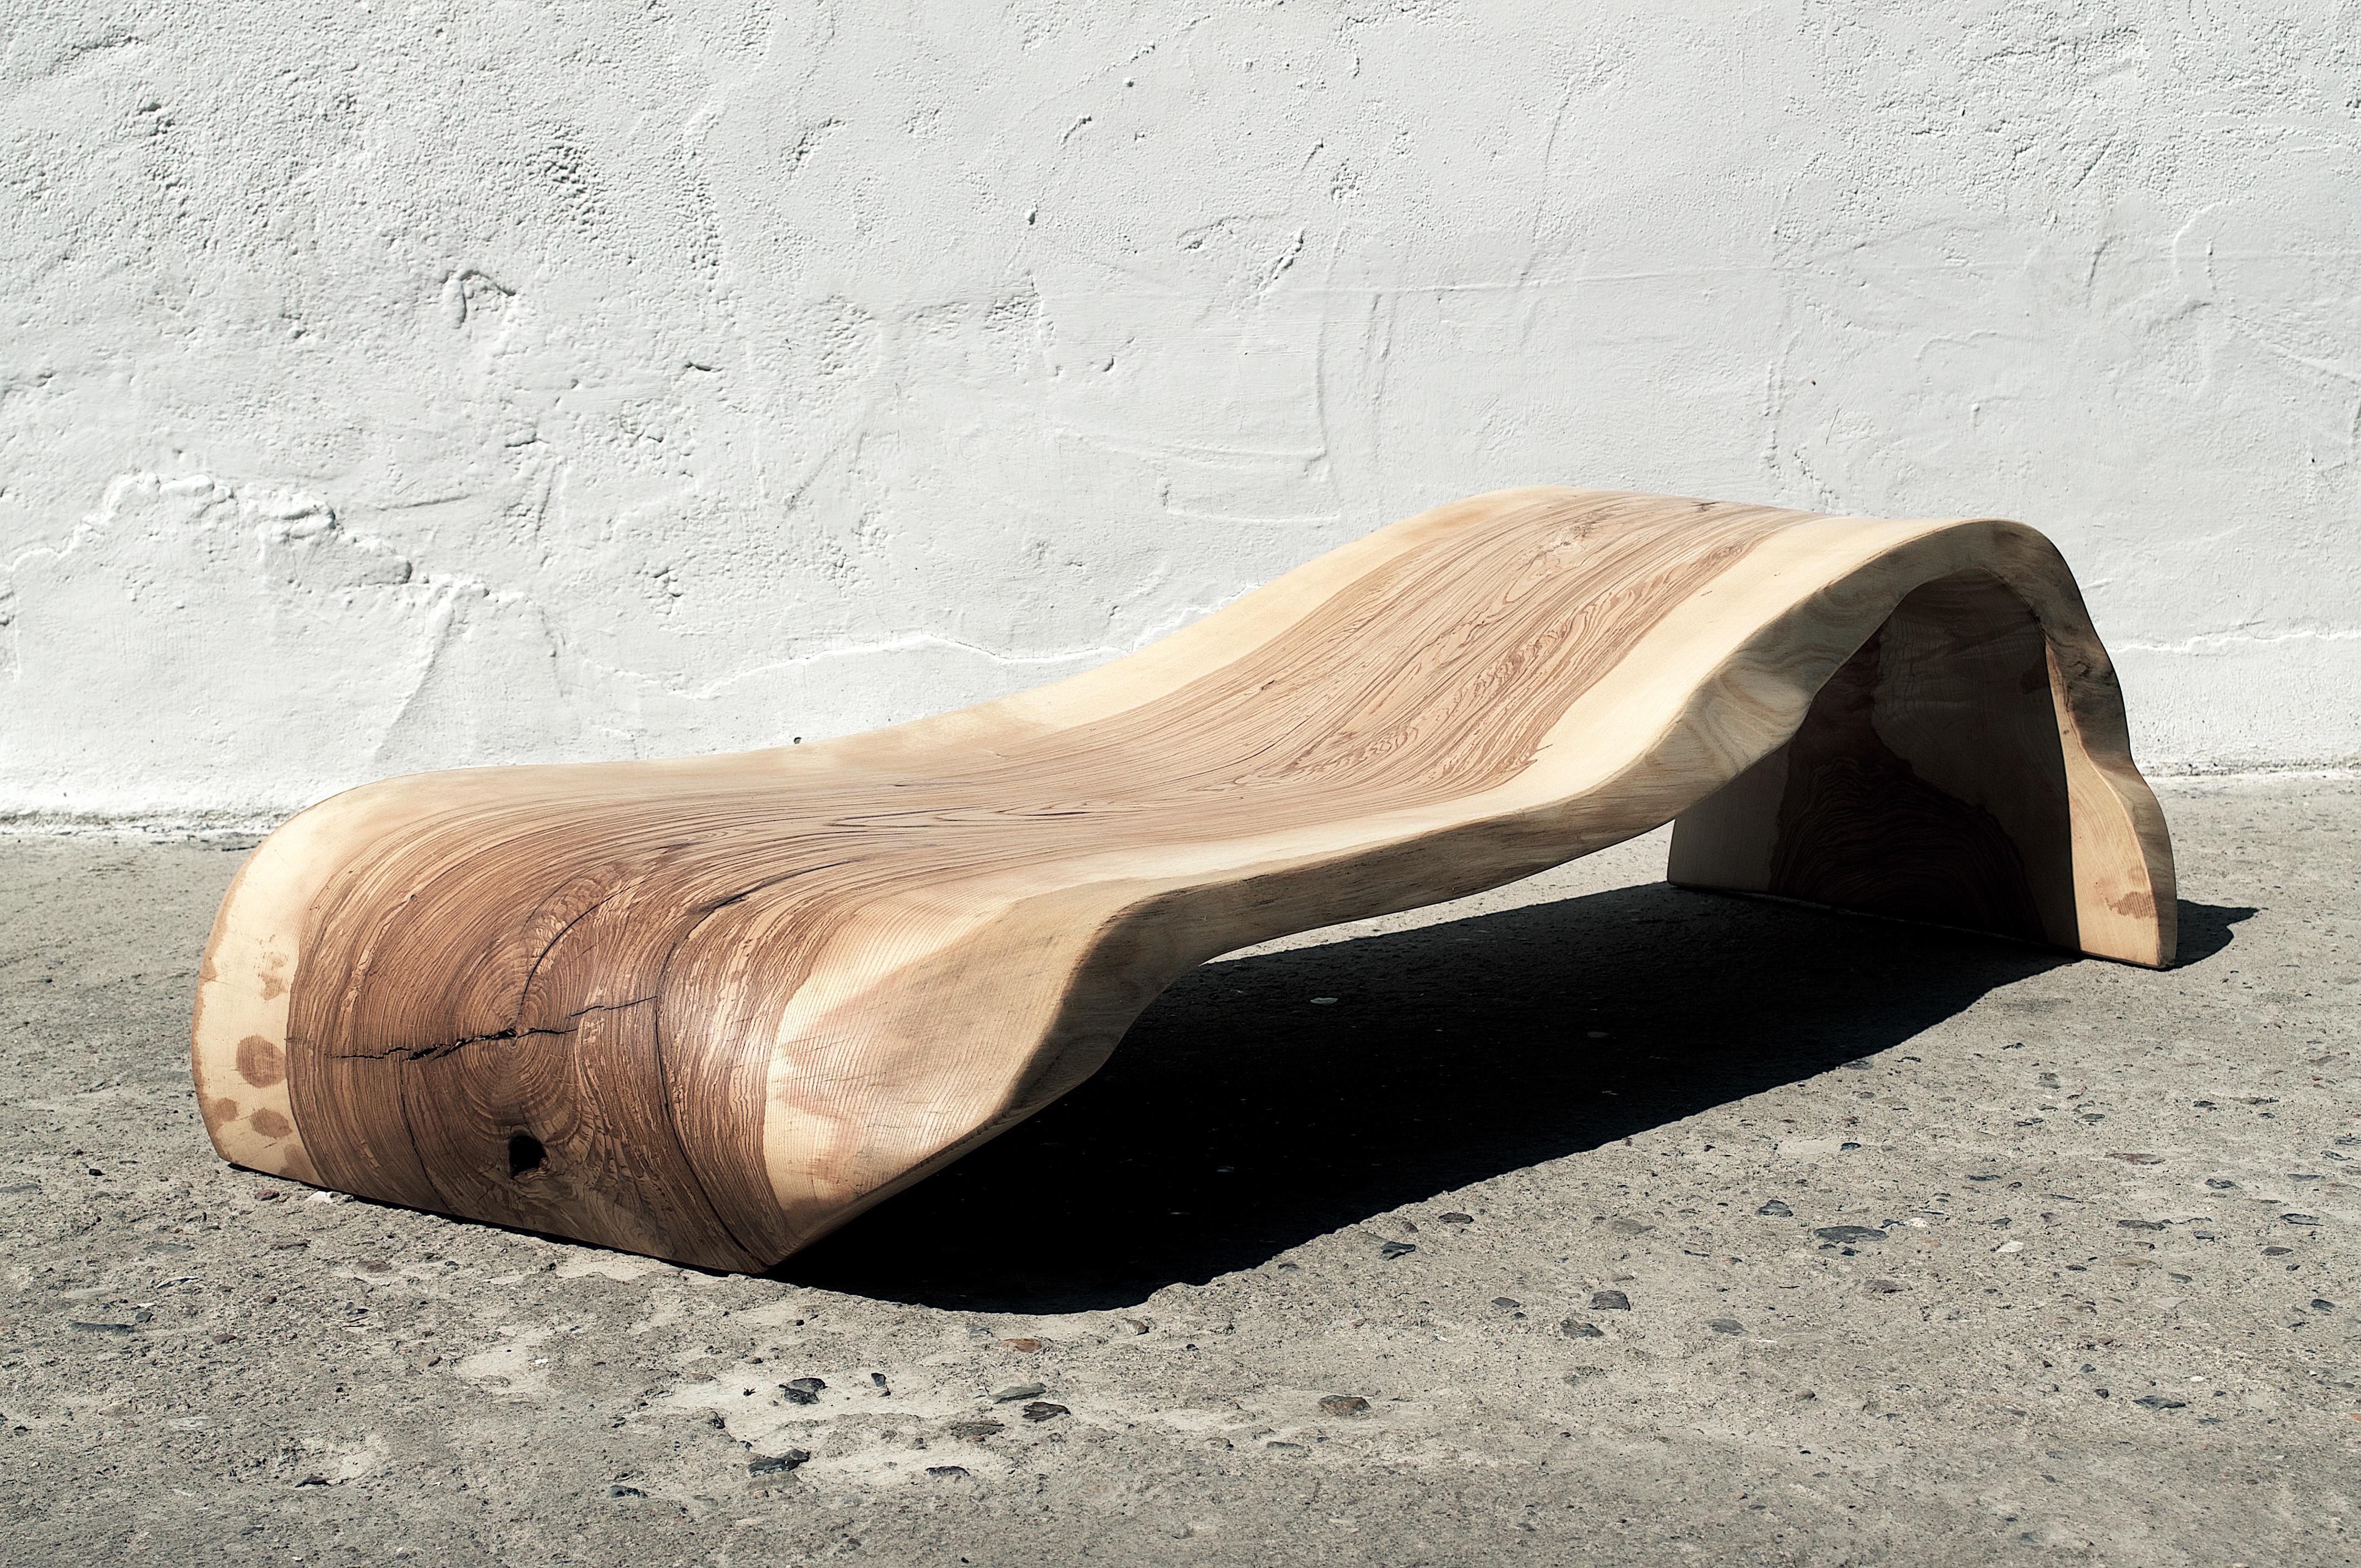 Unique signed lounger by Jörg Pietschmann
Ash
Dimensions: H 36 x W 141 x D 62 cm


Side piece of an old oak with exceptional burl on colorful legs. Polished oil finish.

In Pietschmann’s sculptures, trees that for centuries were part of a